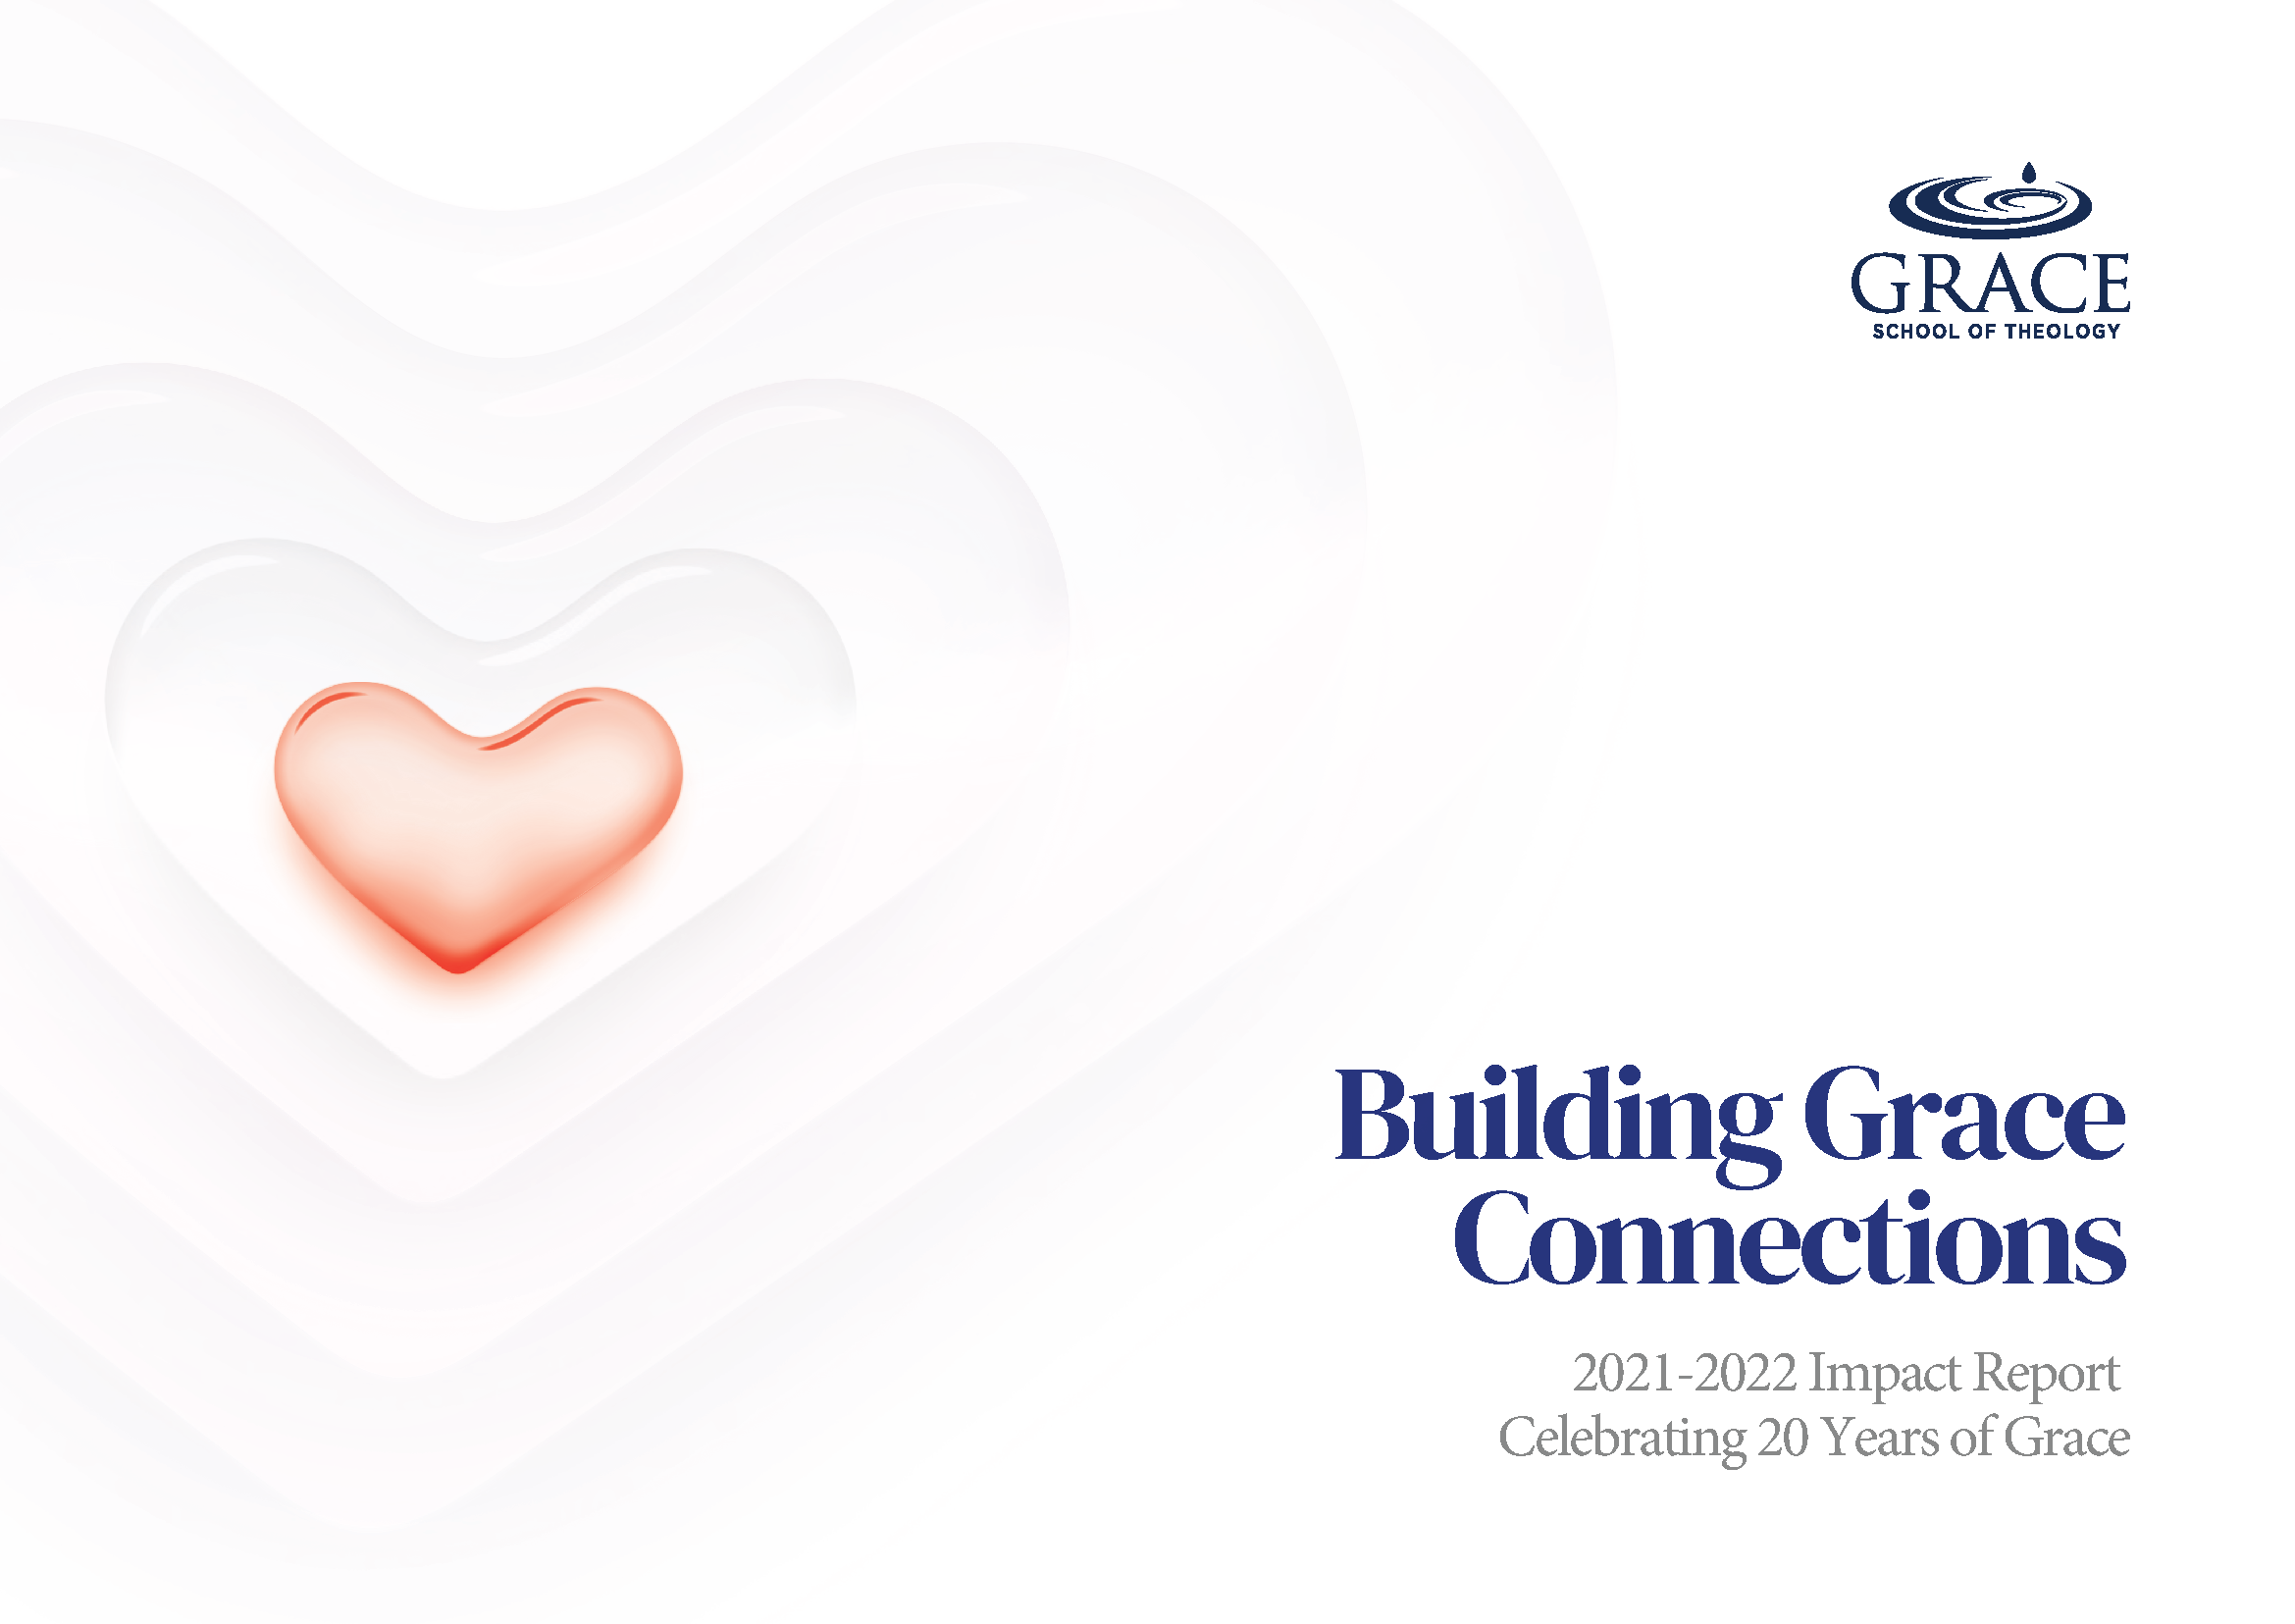 Annual Impact Report: Celebrating 20 Years of Grace